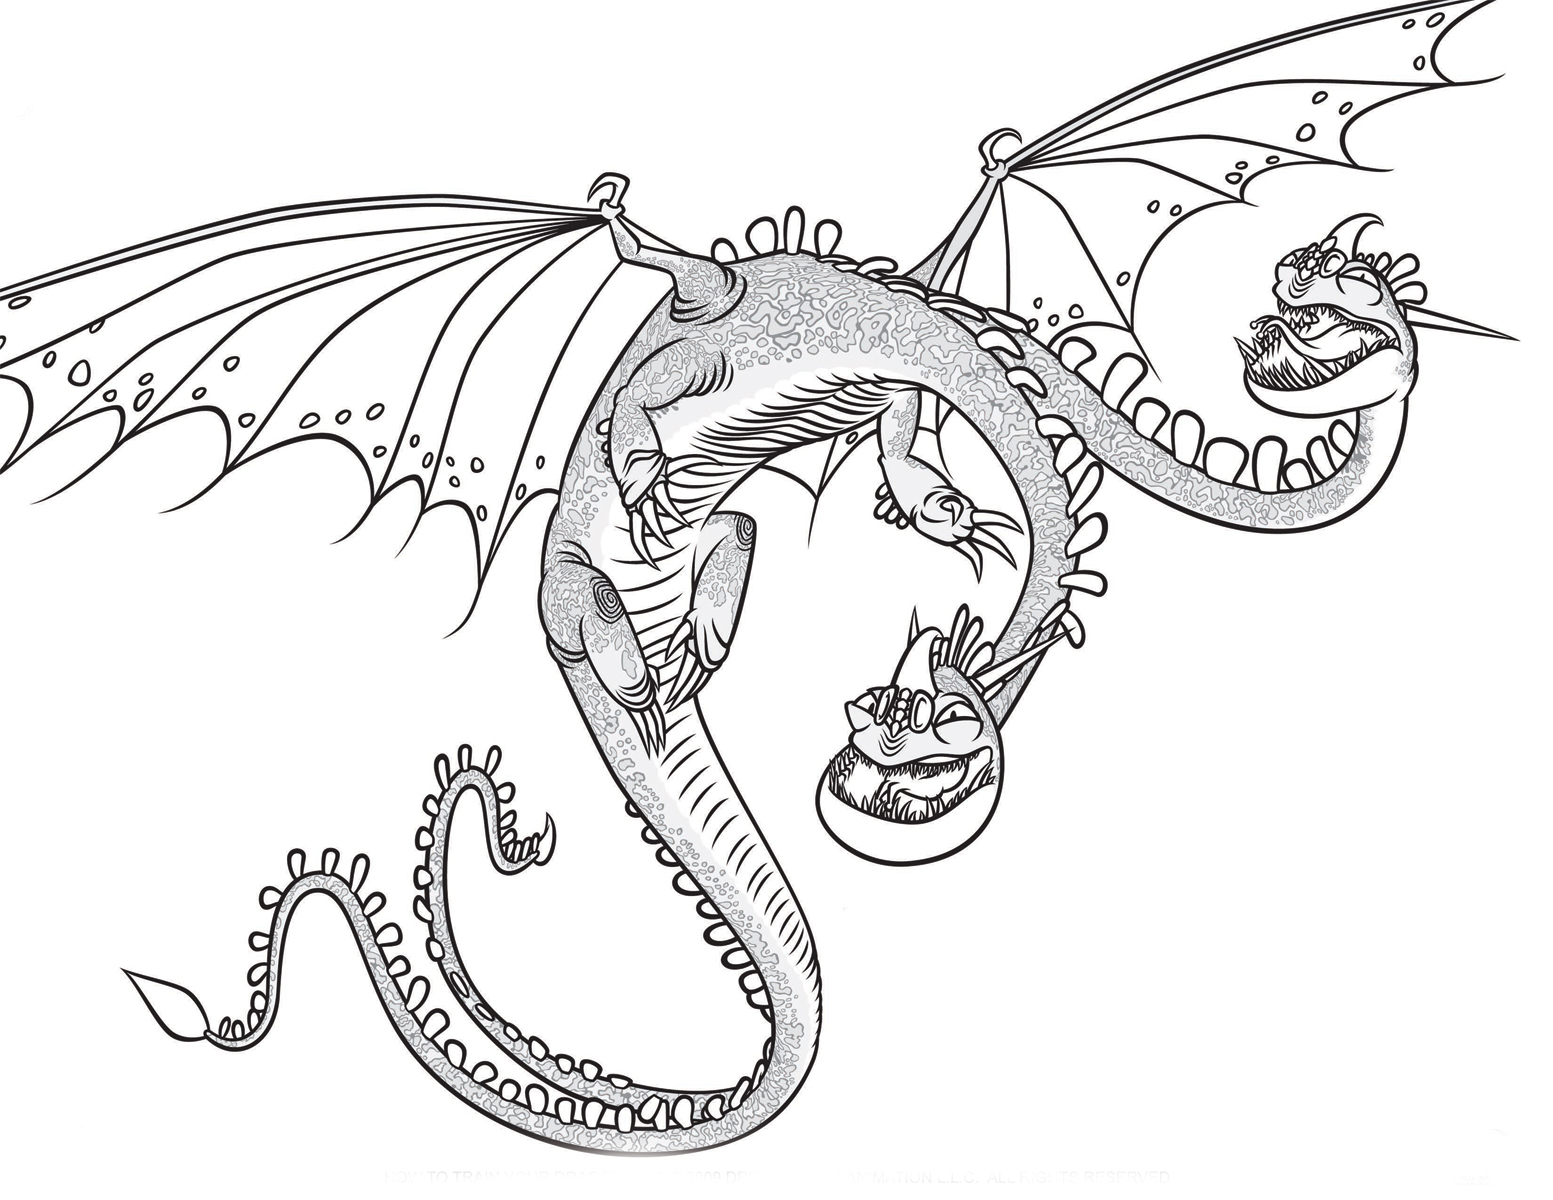 How to Train Your Dragon coloring pages to download and ...